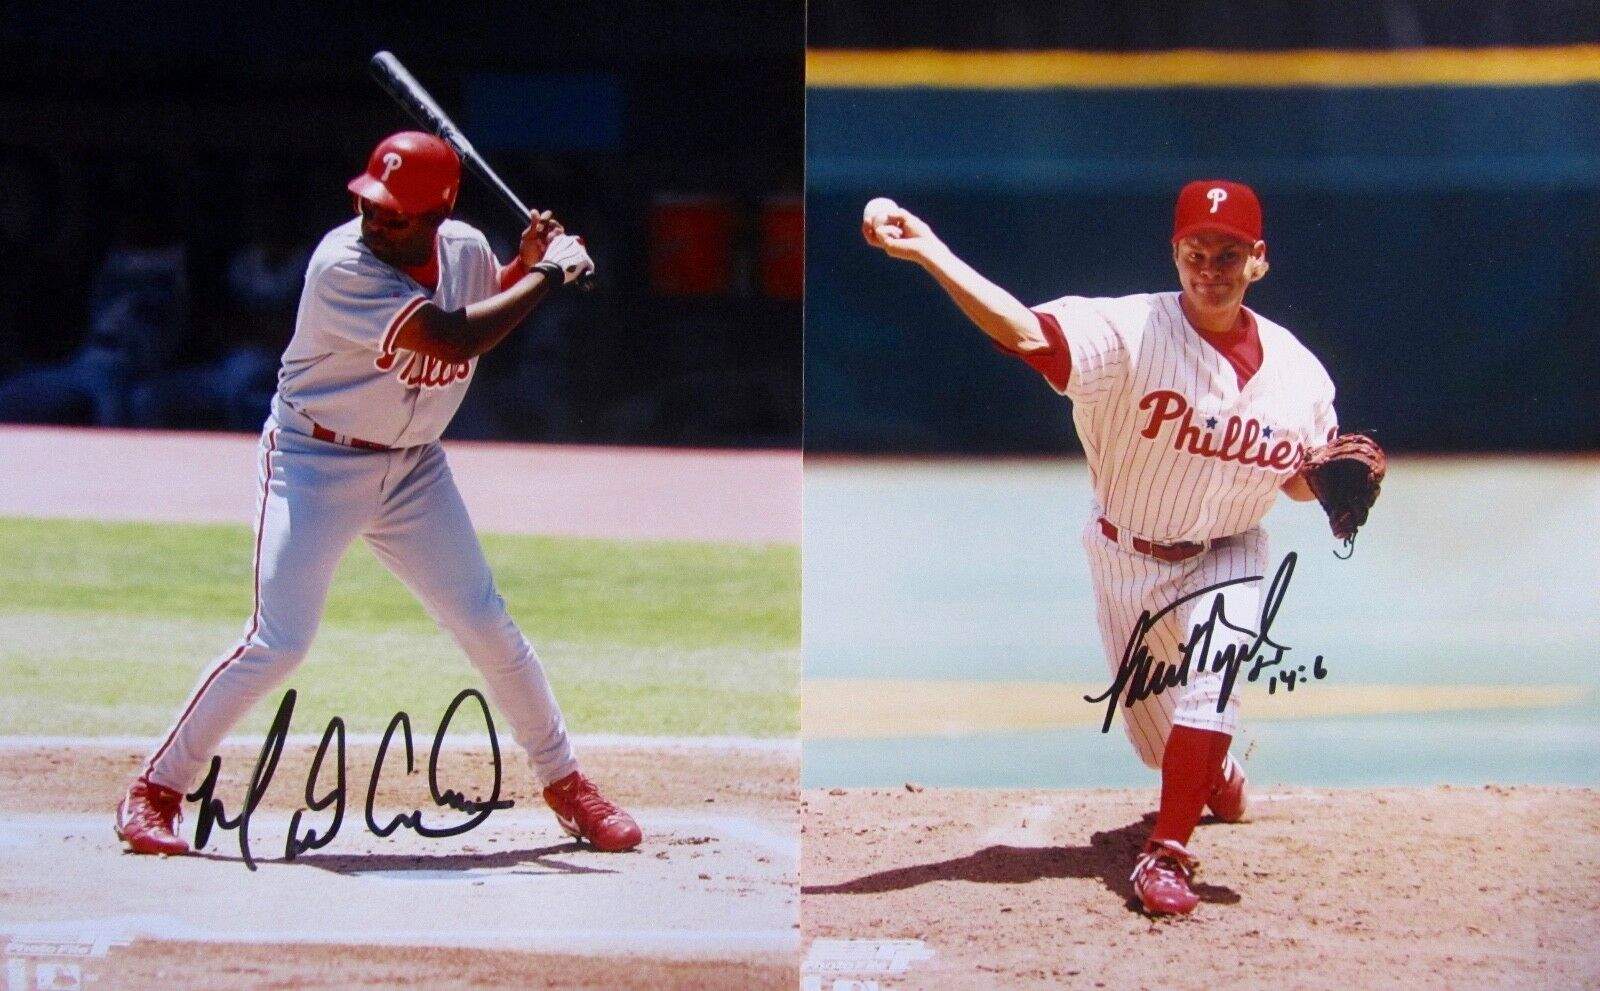 MARLON ANDERSON & PAUL BYRD AUTOGRAPHED SIGNED PHILLIES 8x10 Photo Poster paintingS w/COA'S